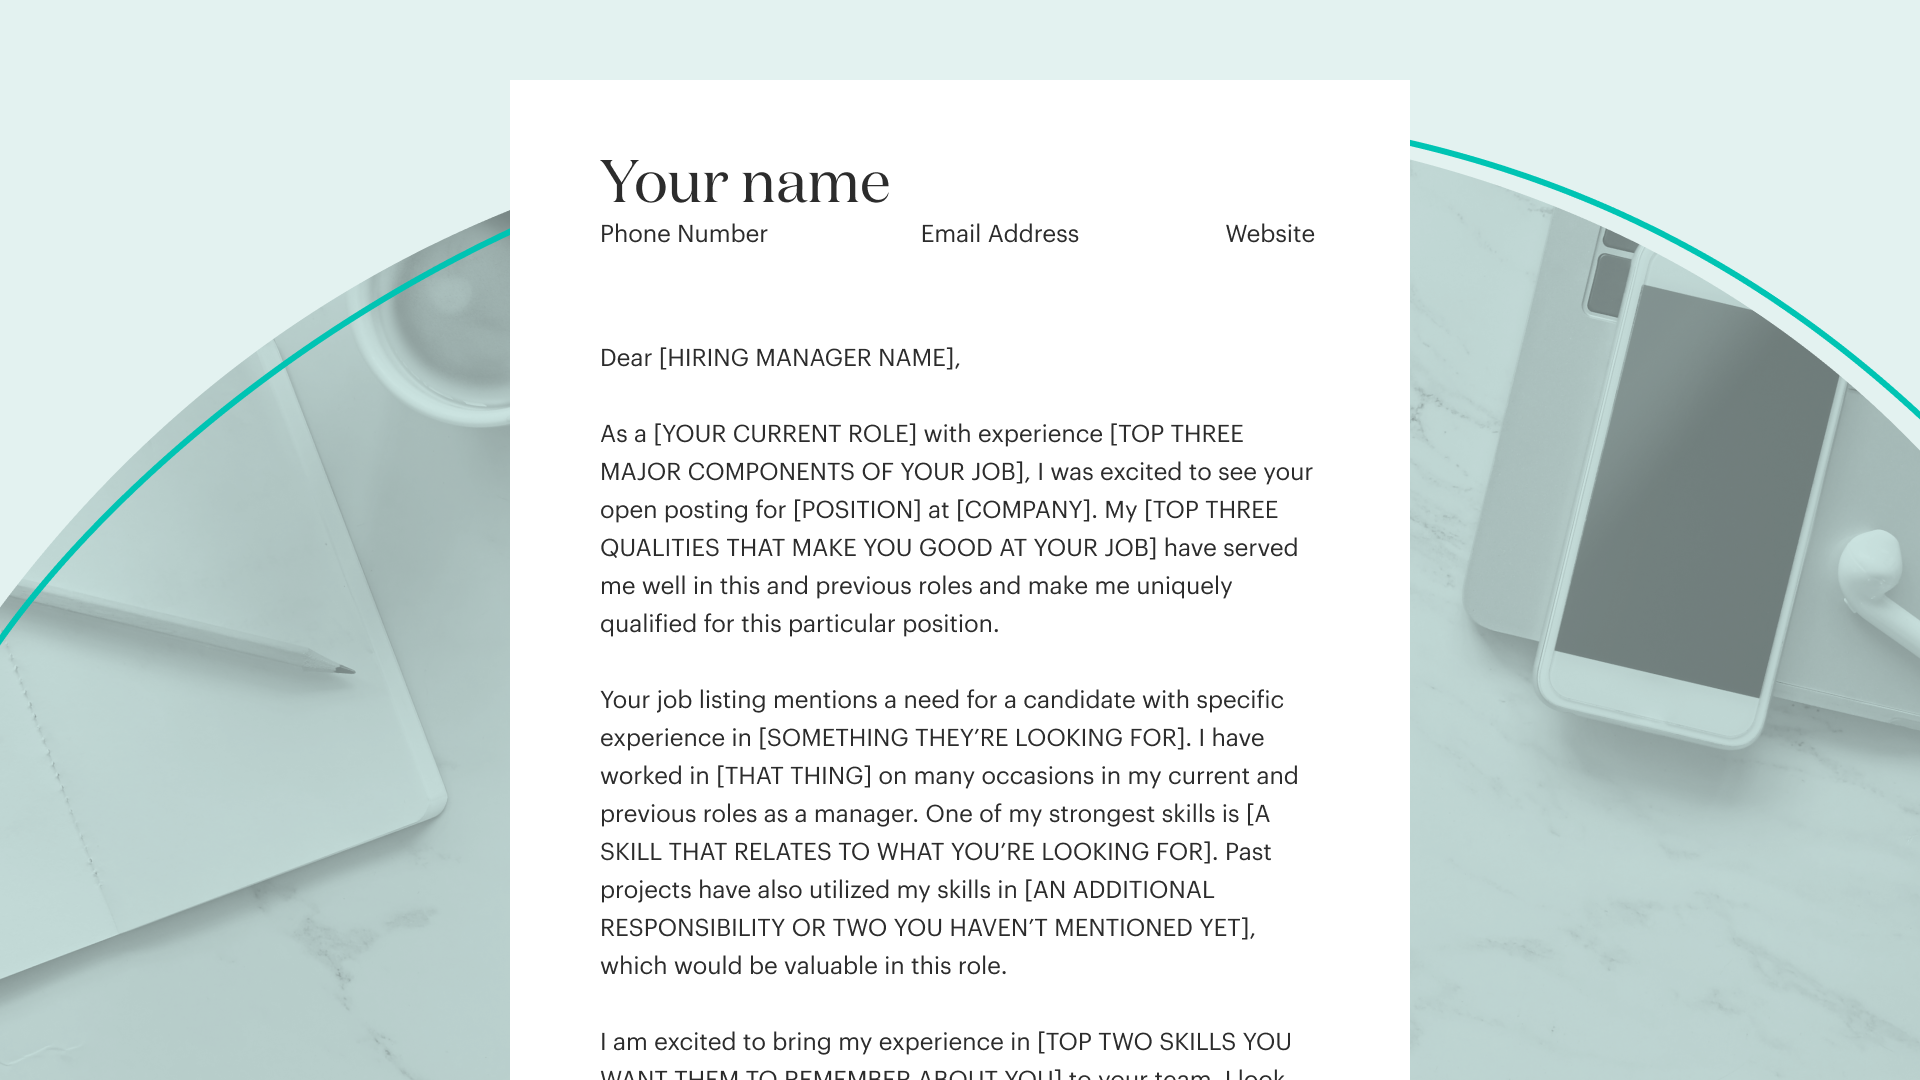 How Long Should a Cover Letter Be? A Guide To Writing One | theSkimm